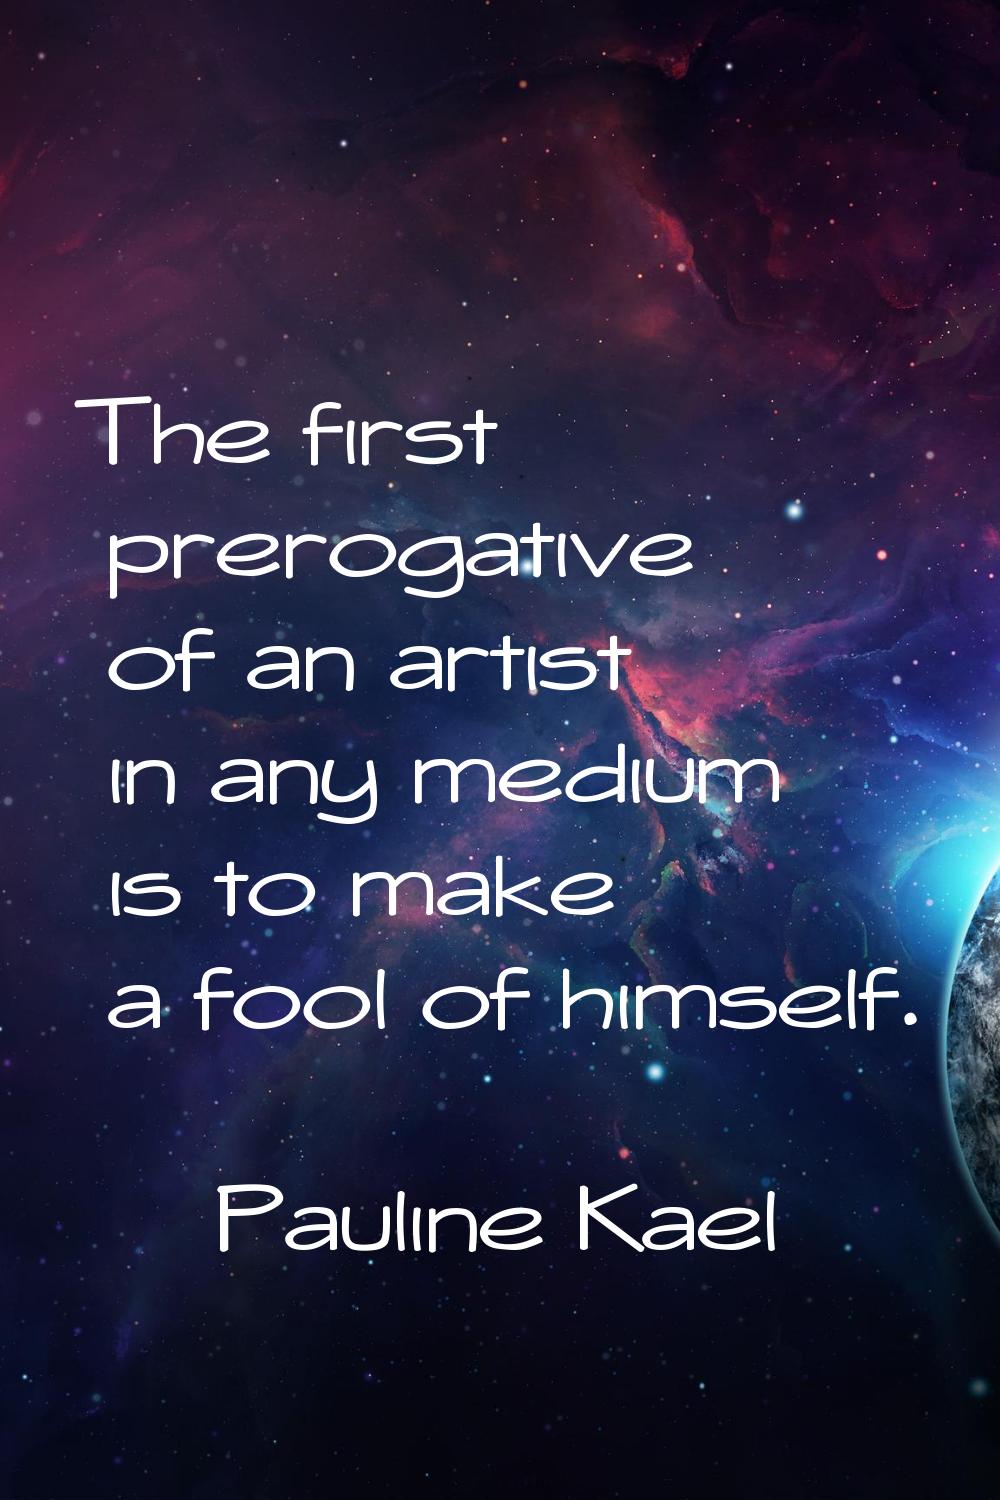 The first prerogative of an artist in any medium is to make a fool of himself.